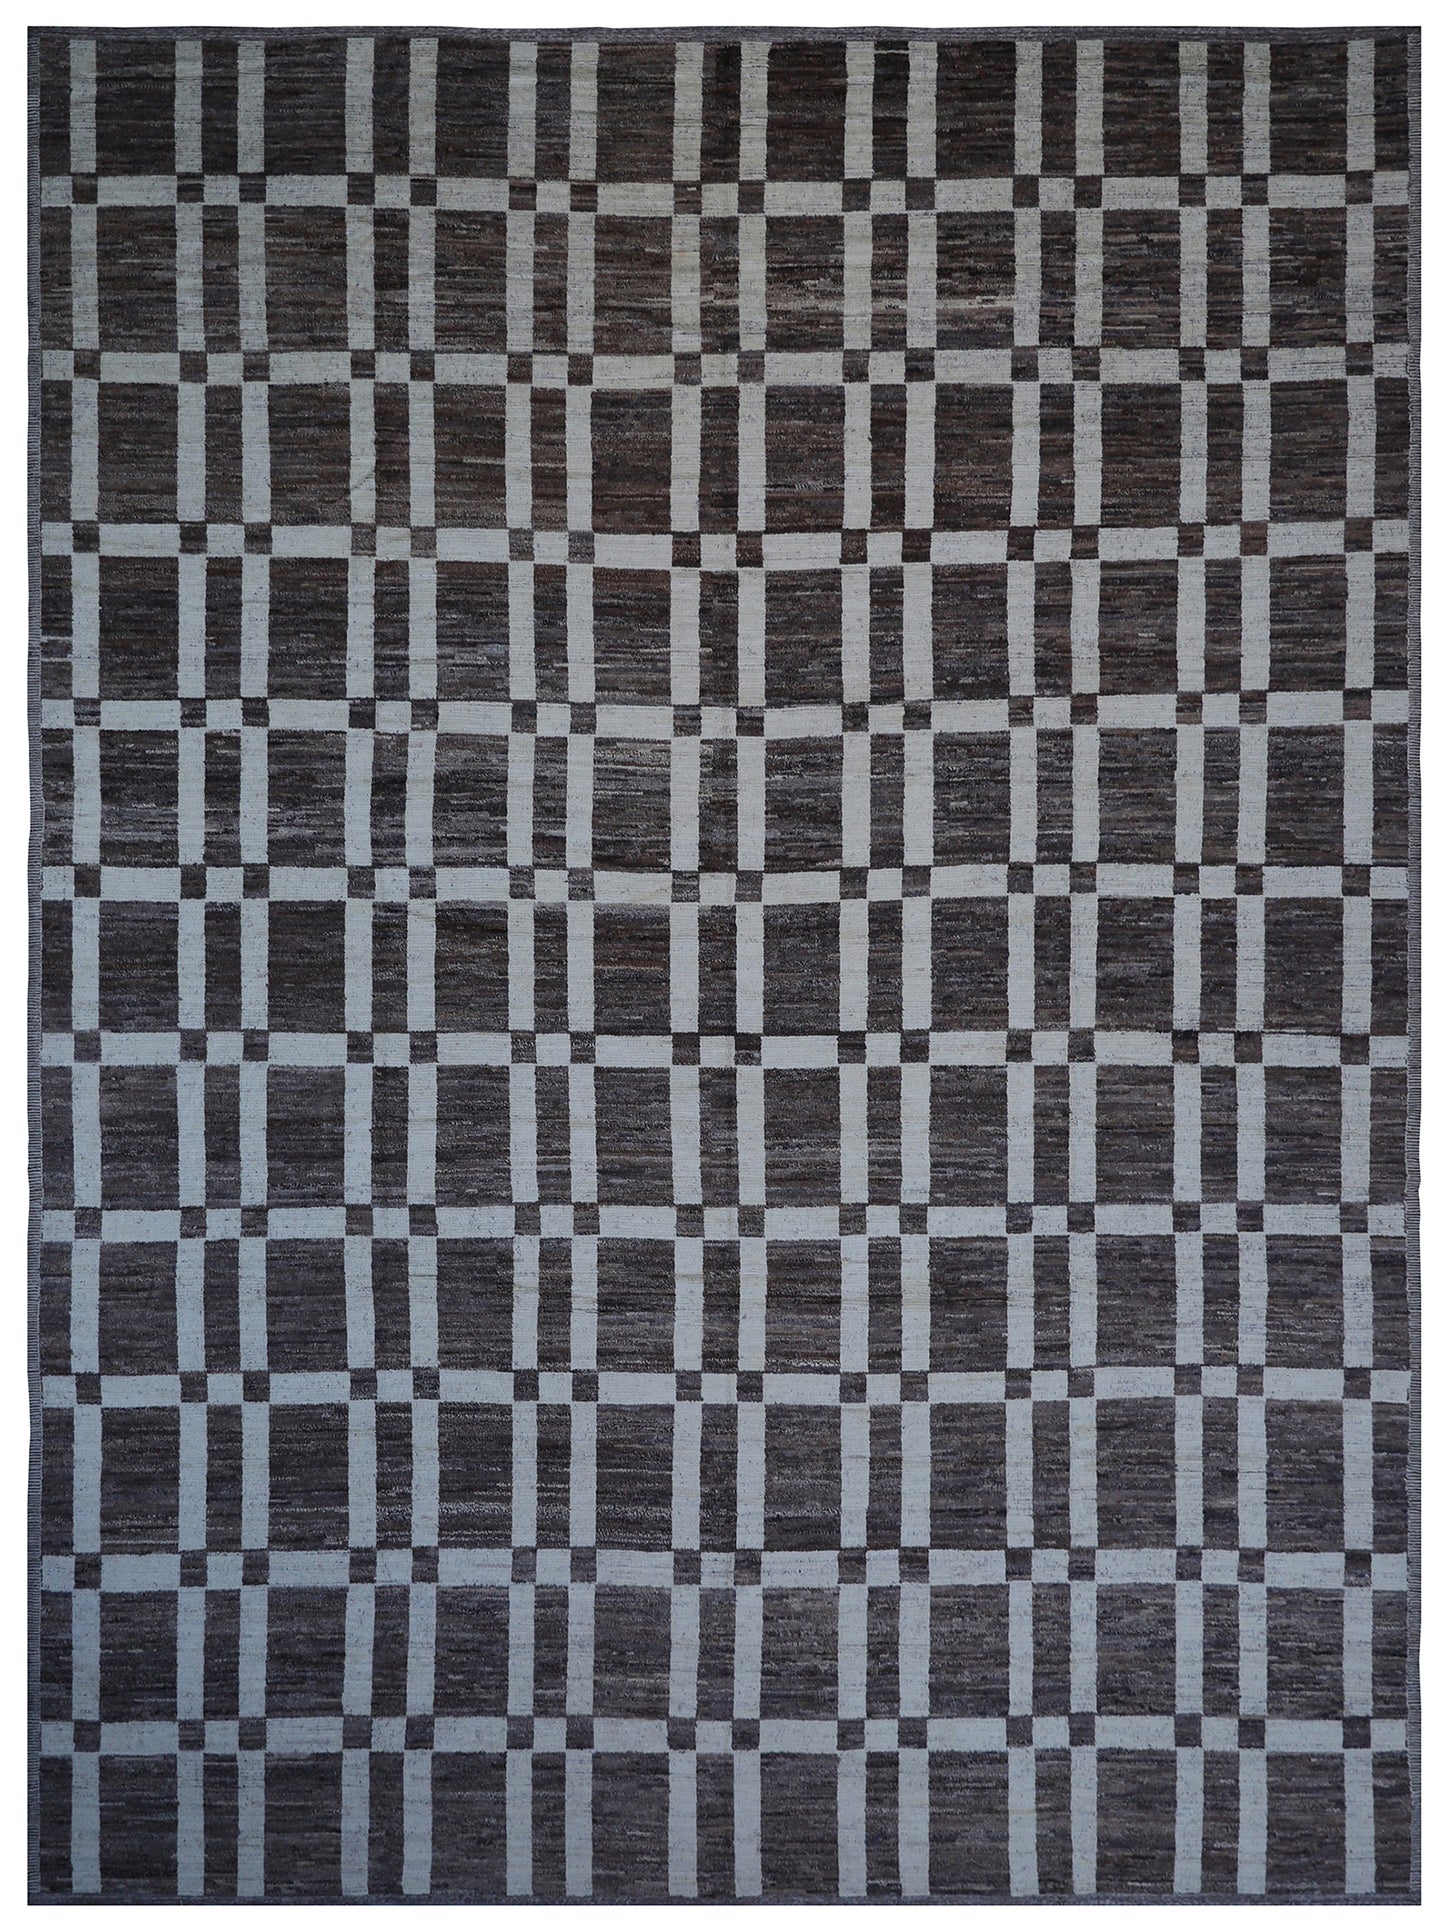 14'x20' Large Ariana Moroccan Geometric Brown and Ivory Barchi Rug